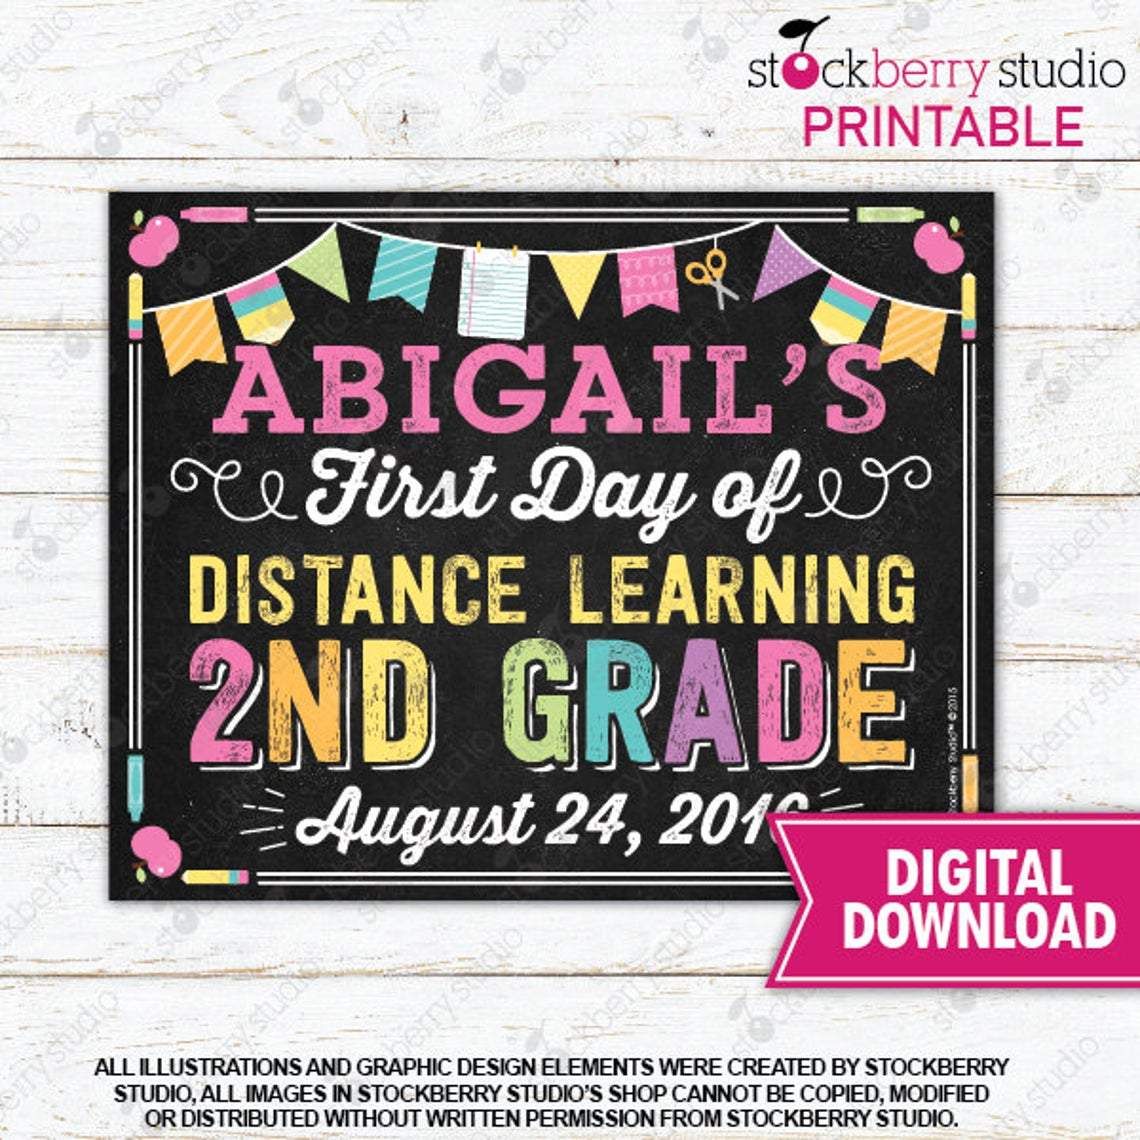 First Day of Virtual School Printable Sign E-learning